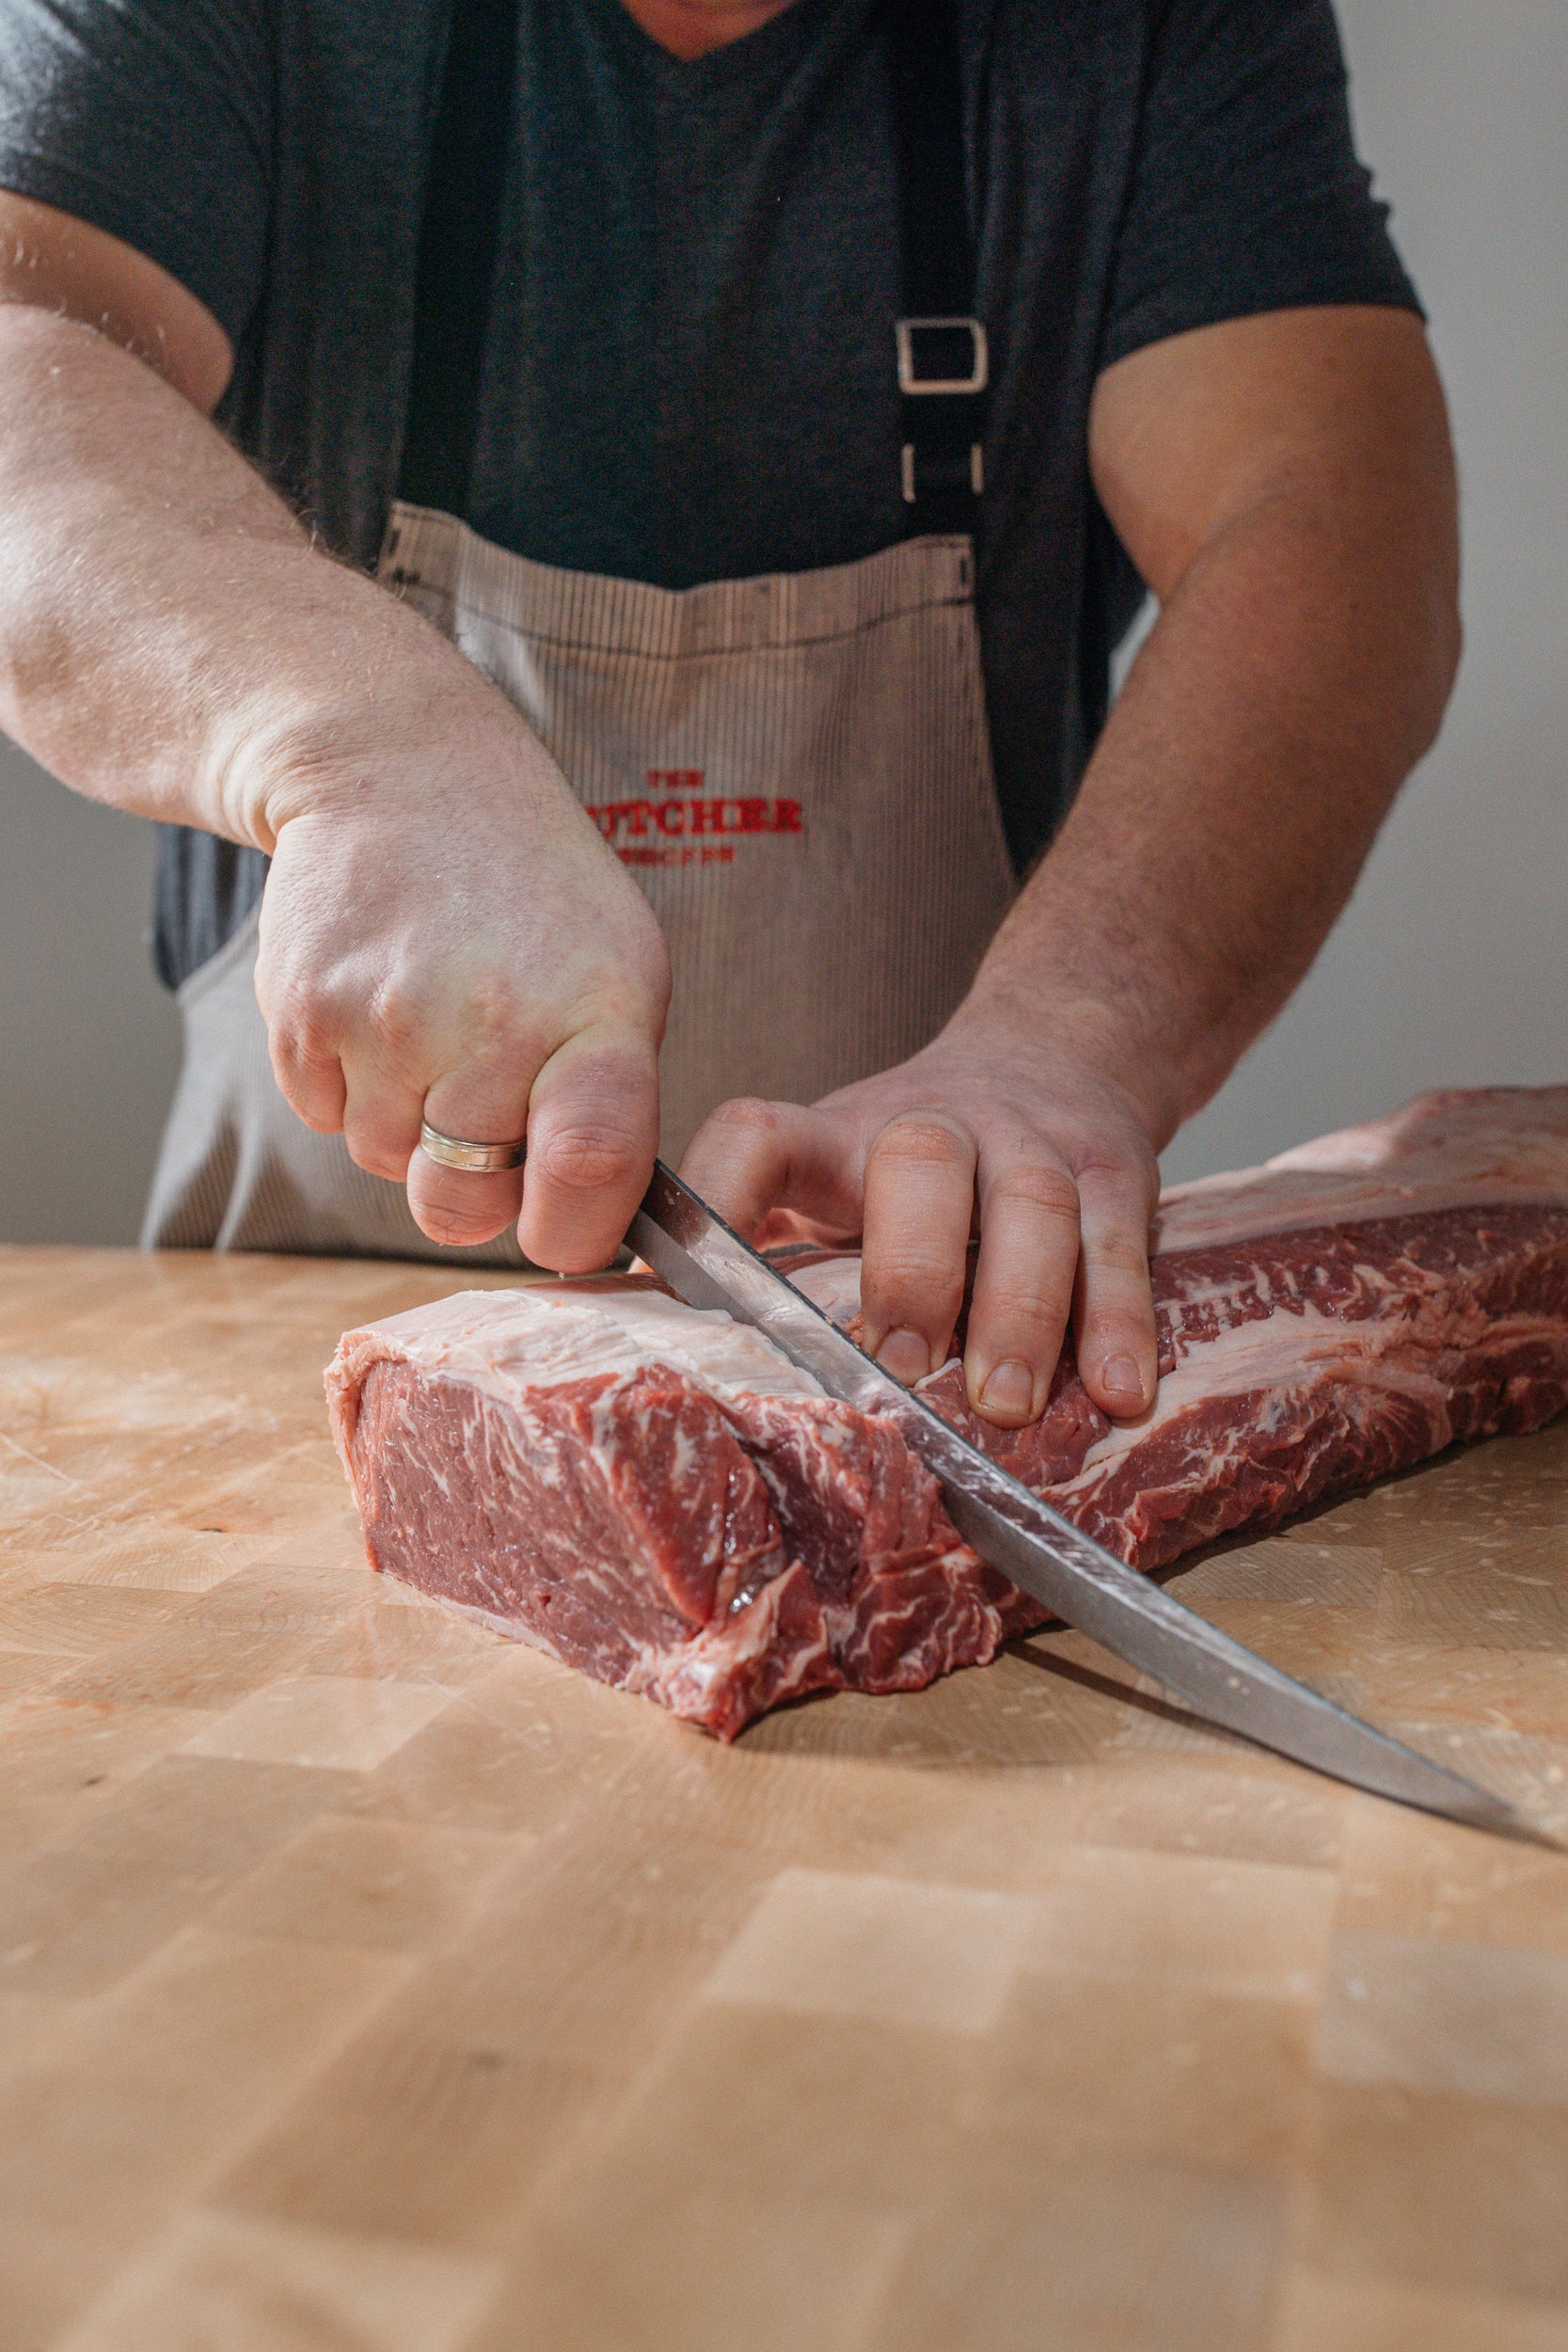 The Art of Butchery at The Butcher Shoppe - BellwetherX: Showcasing the mastery of meatcraft and skillful expertise in collaboration with BellwetherX.